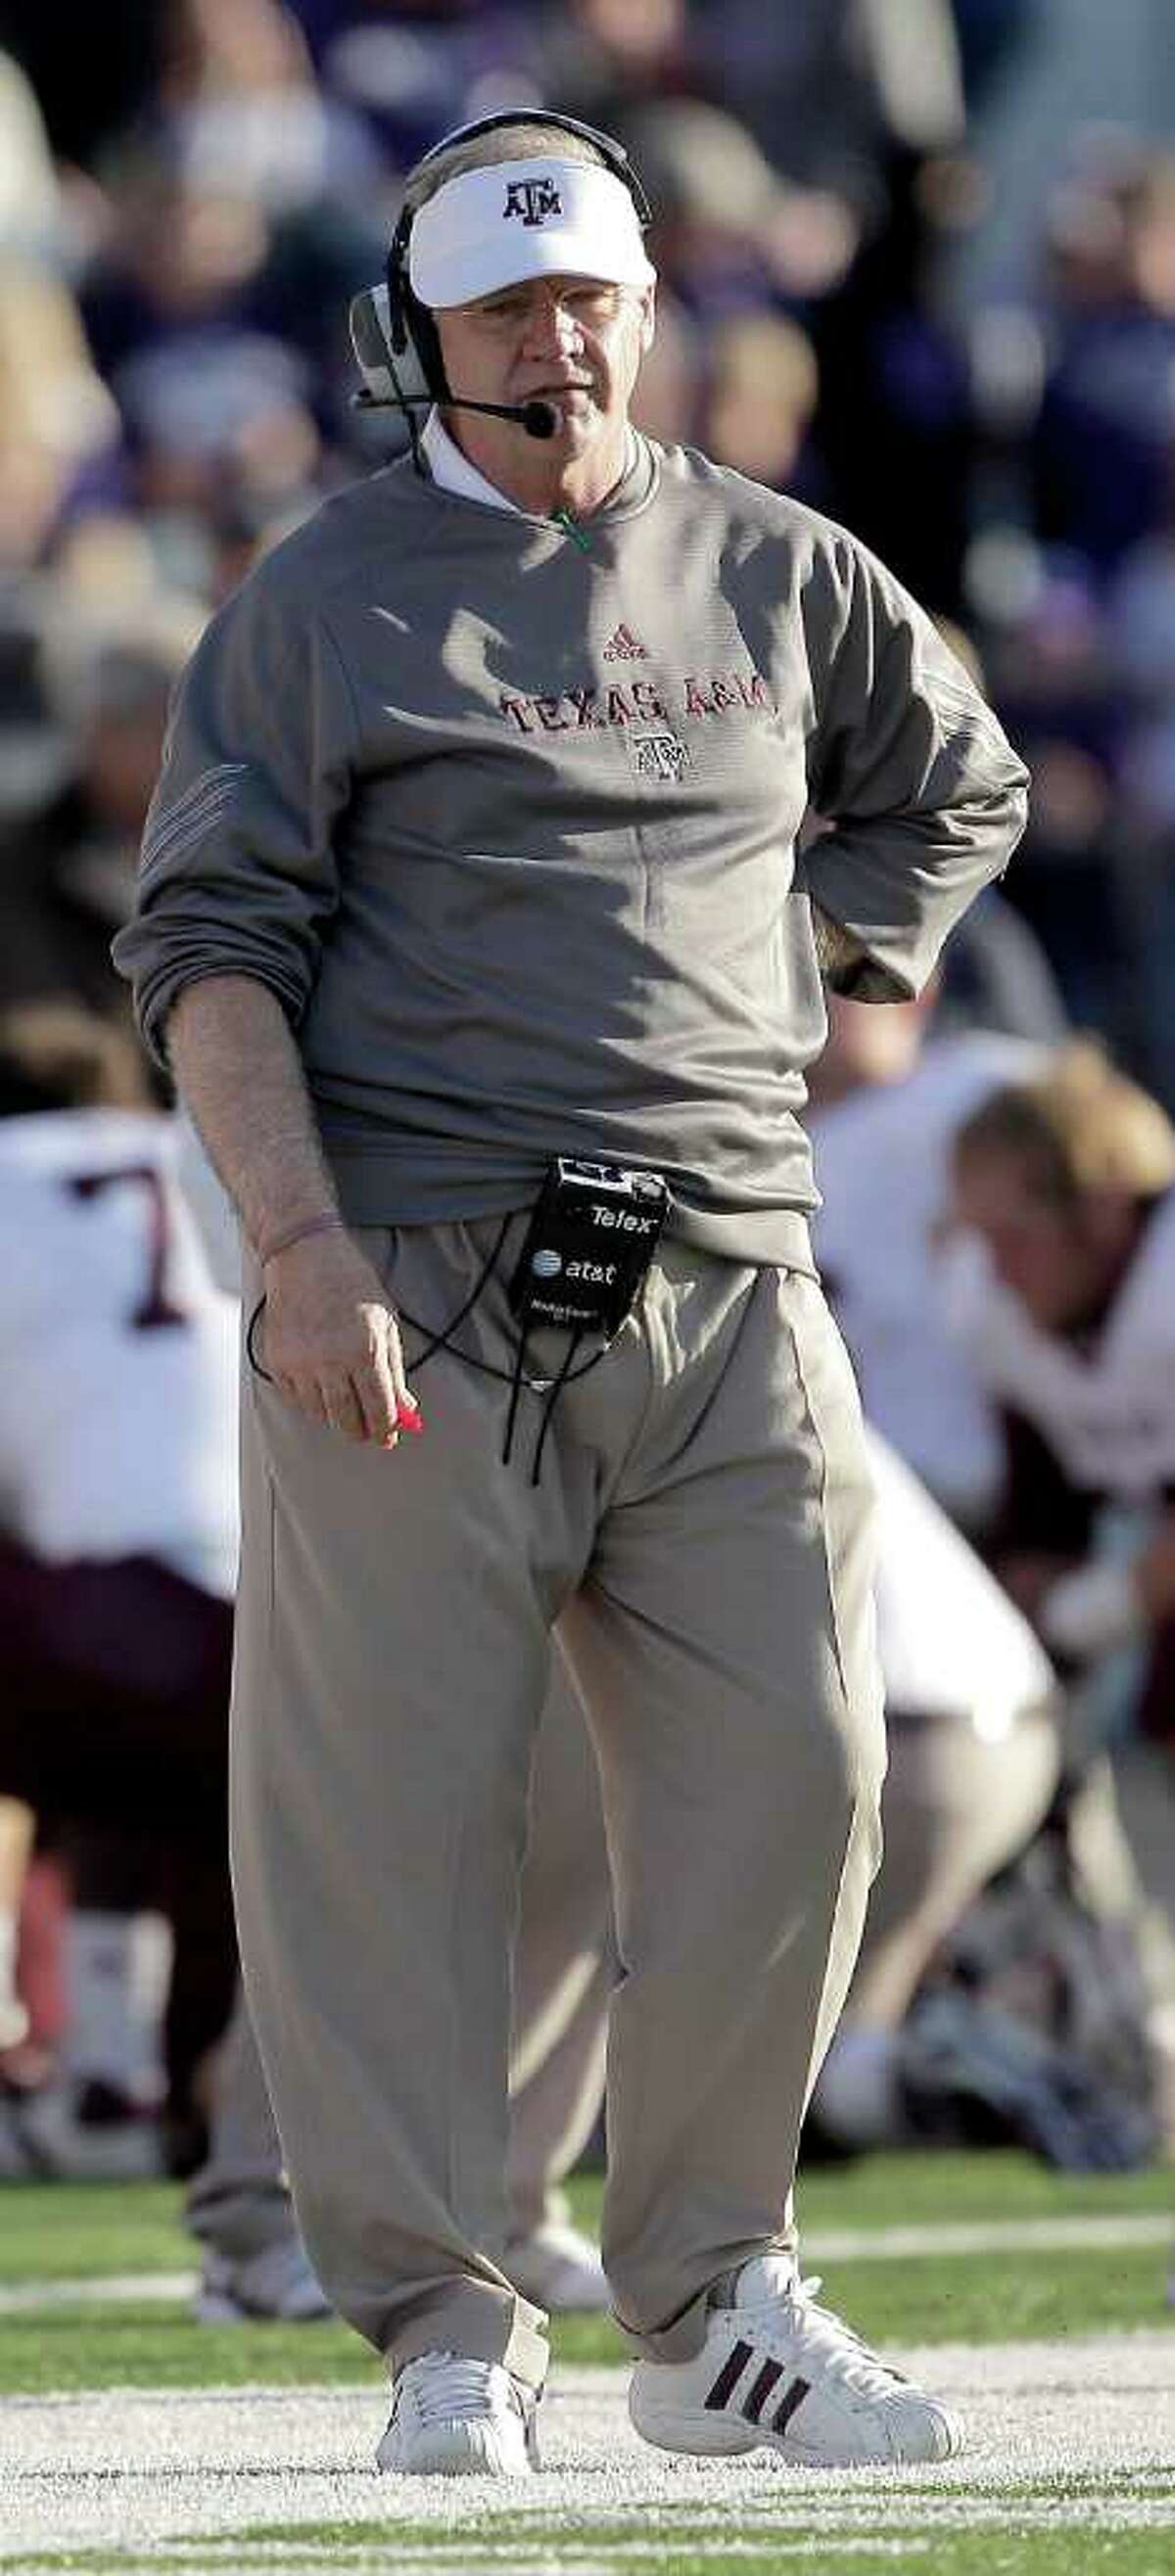 Texas A&M head coach Mike Sherman watches a play during the second quarter of an NCAA college football game against Kansas State, Saturday, Nov. 12, 2011, in Manhattan, Kan. Kansas State won the game 53-50 in quadruple overtime. (AP Photo/Charlie Riedel)